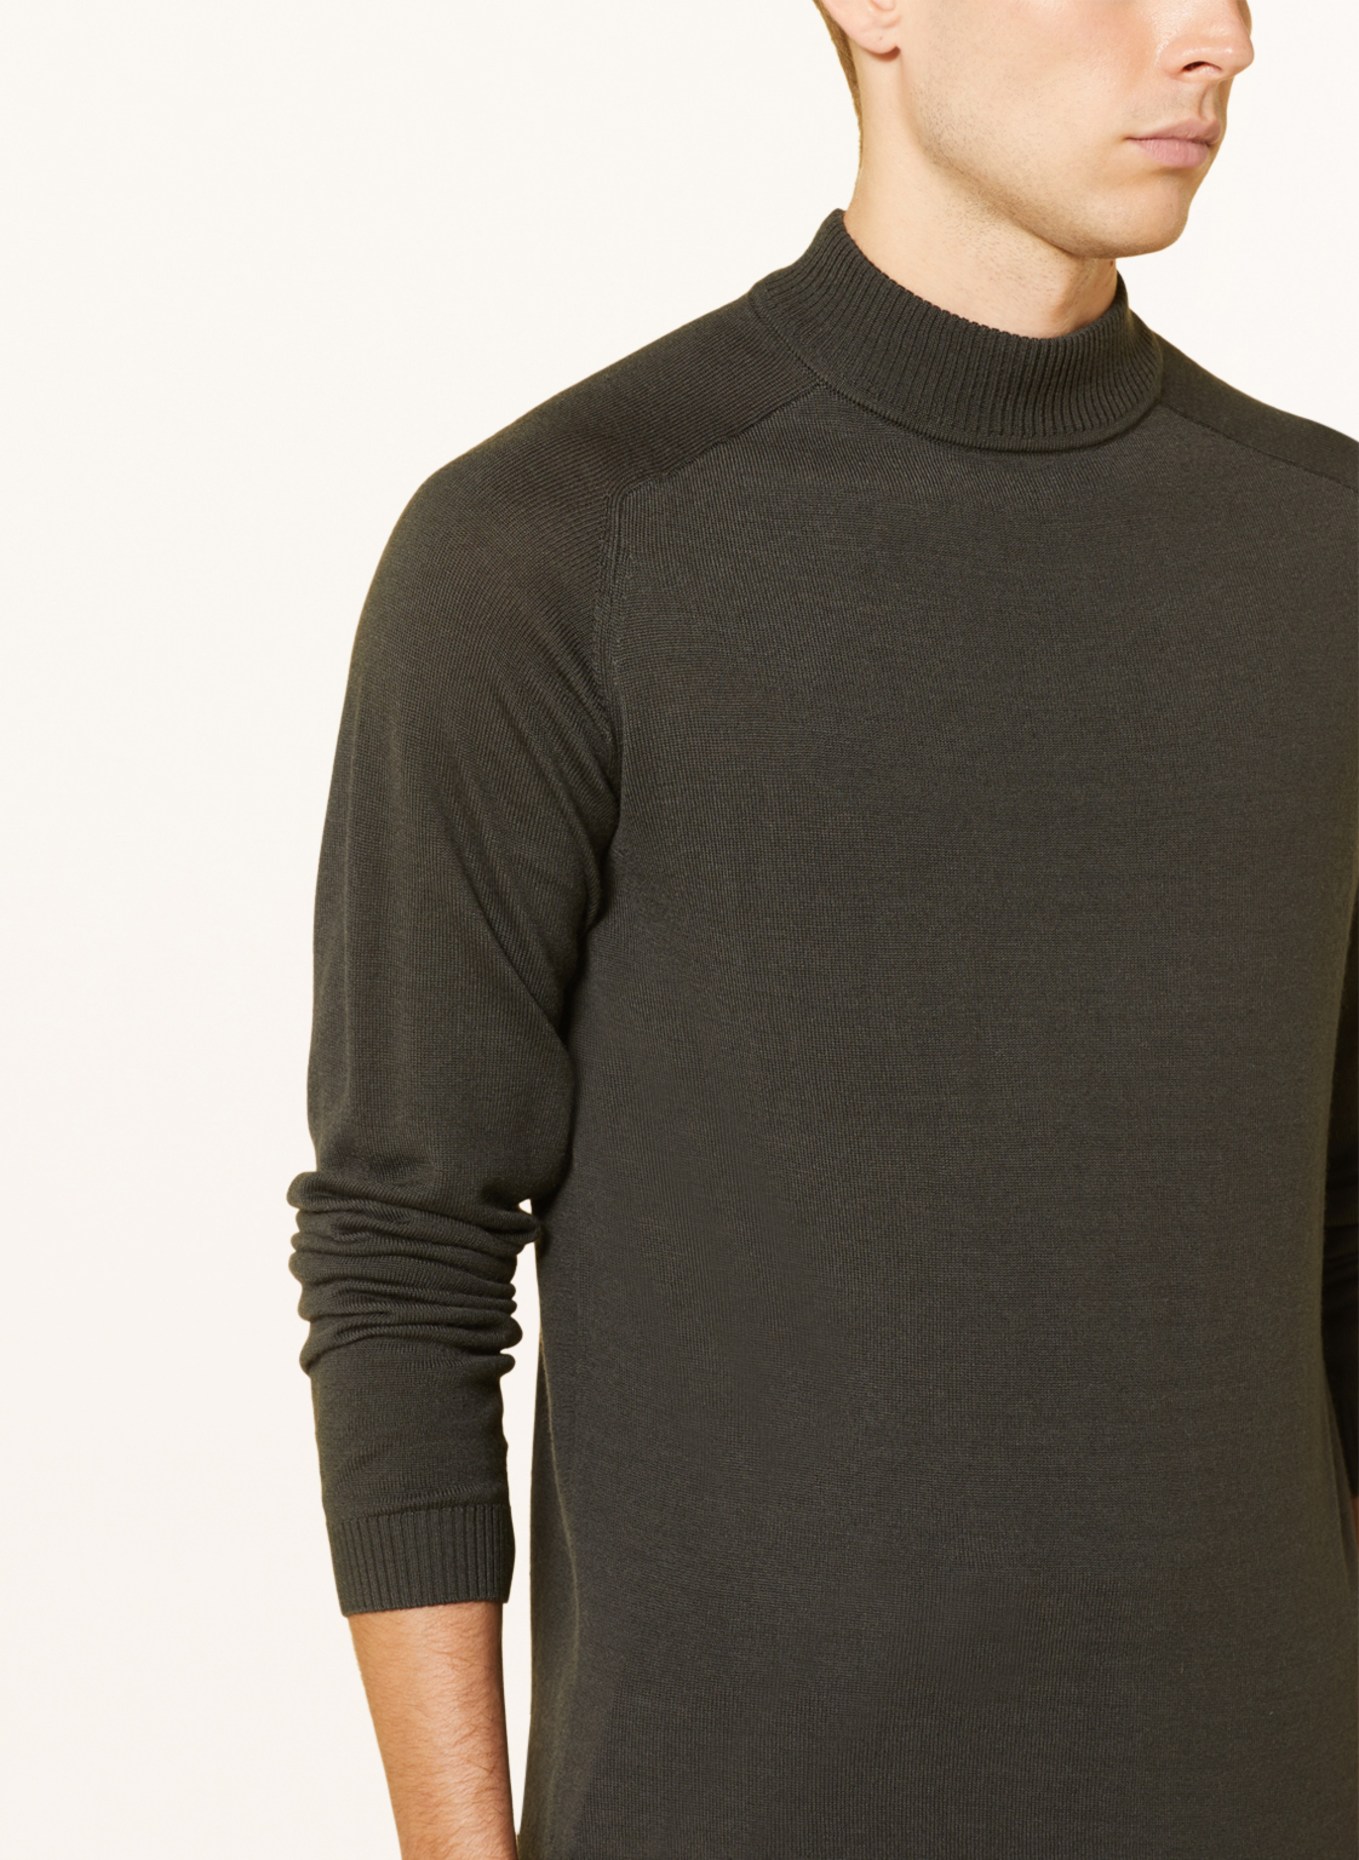 CG - CLUB of GENTS Sweater, Color: DARK GREEN (Image 4)